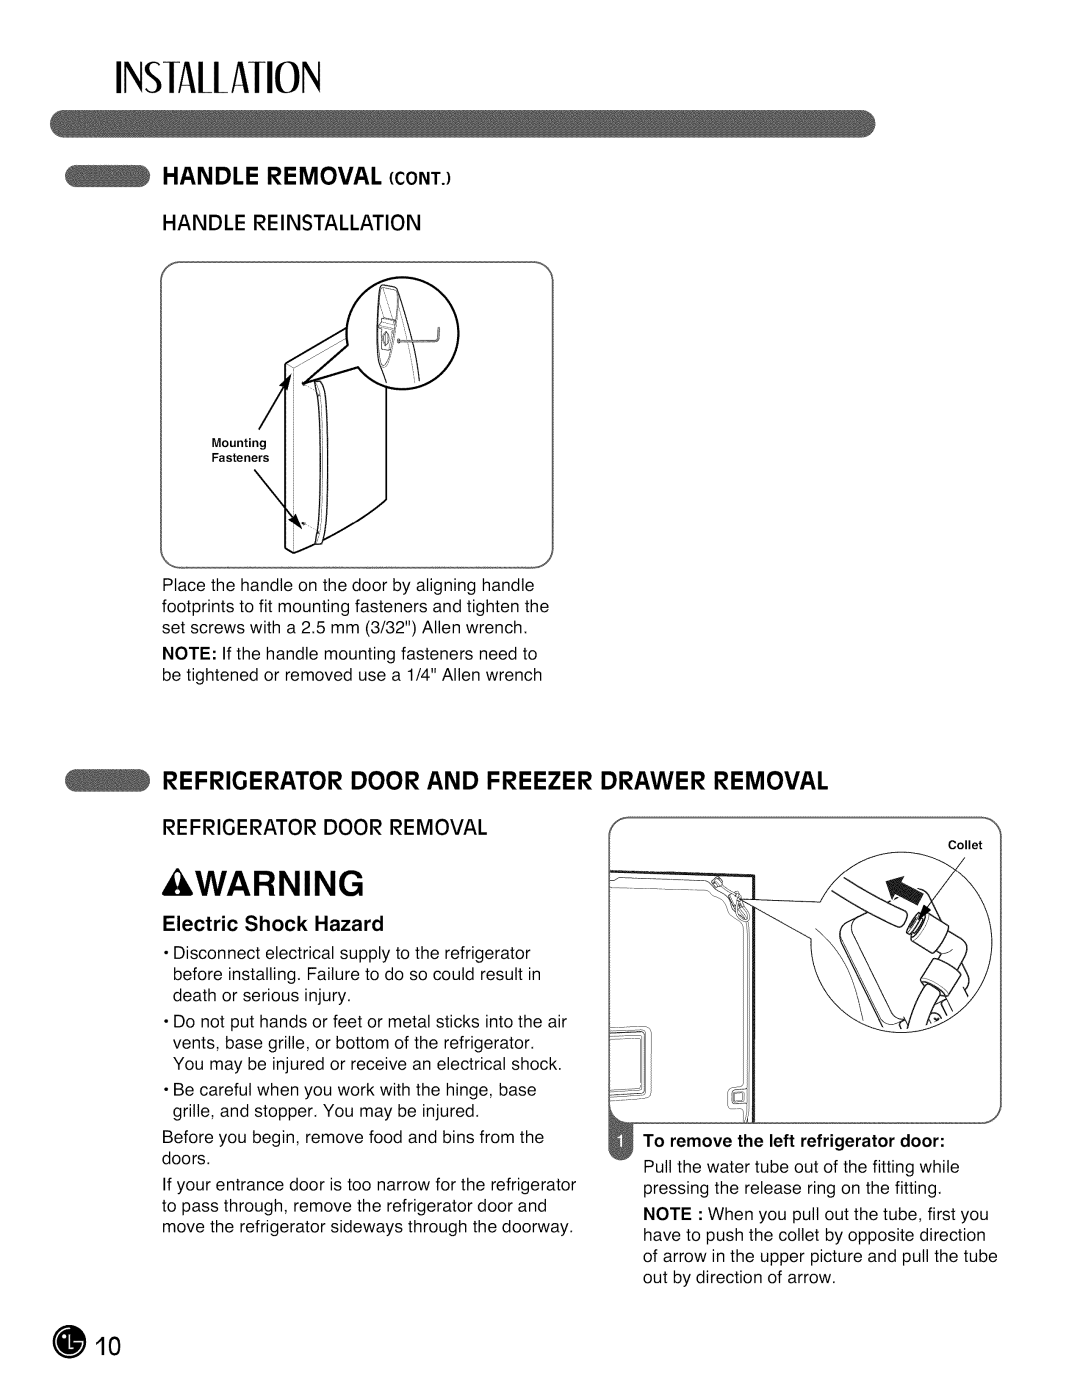 LG Electronics LMX28988 Handle Removal Cont, Refrigerator Door And Freezer Drawer Removal, Handle Reinstallation, Warning 